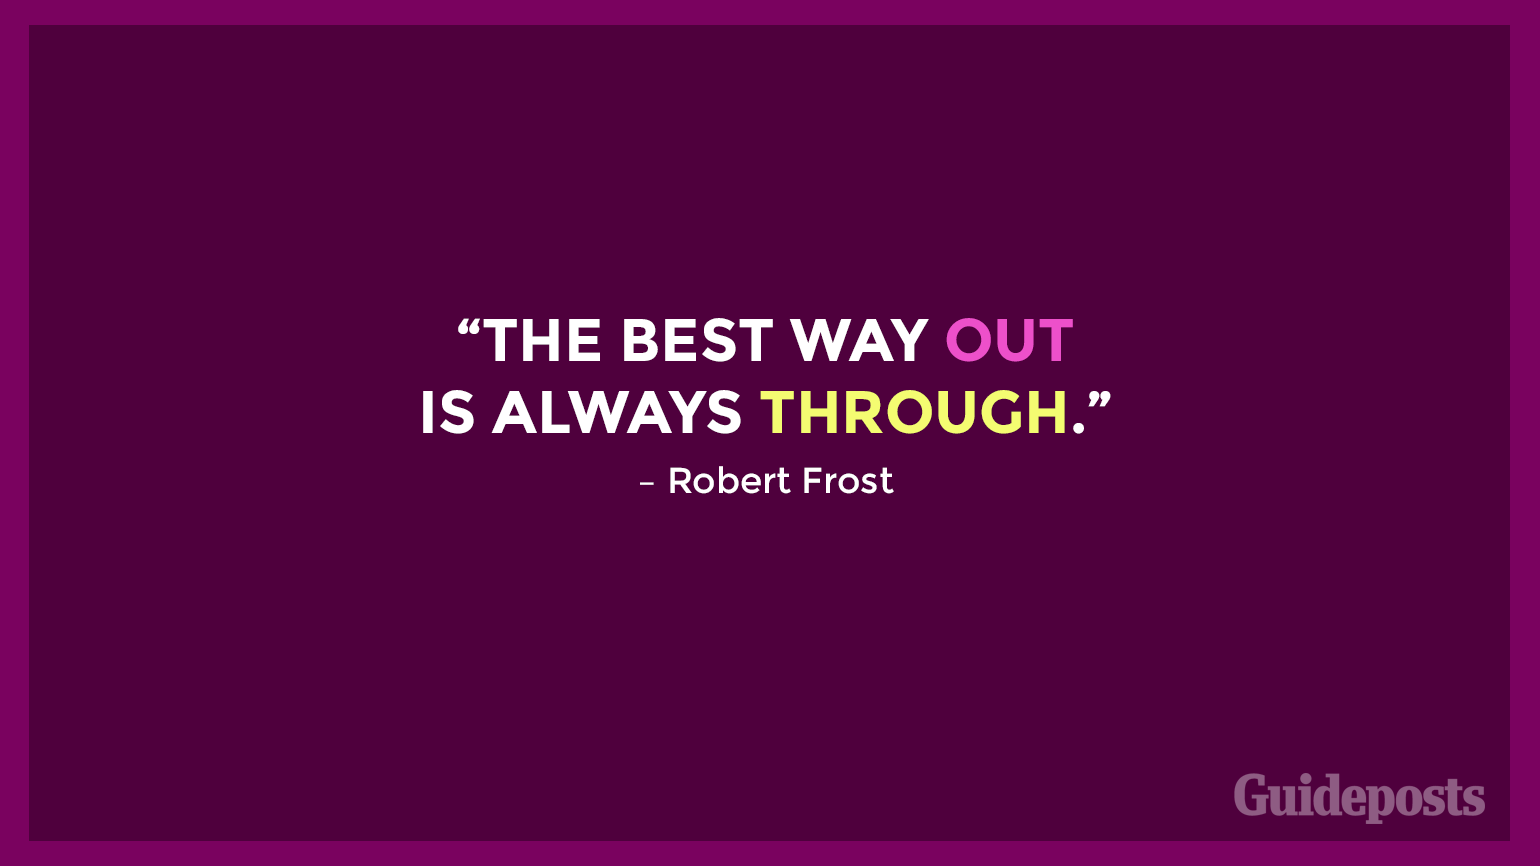 “The best way out is always through.” – Robert Frost